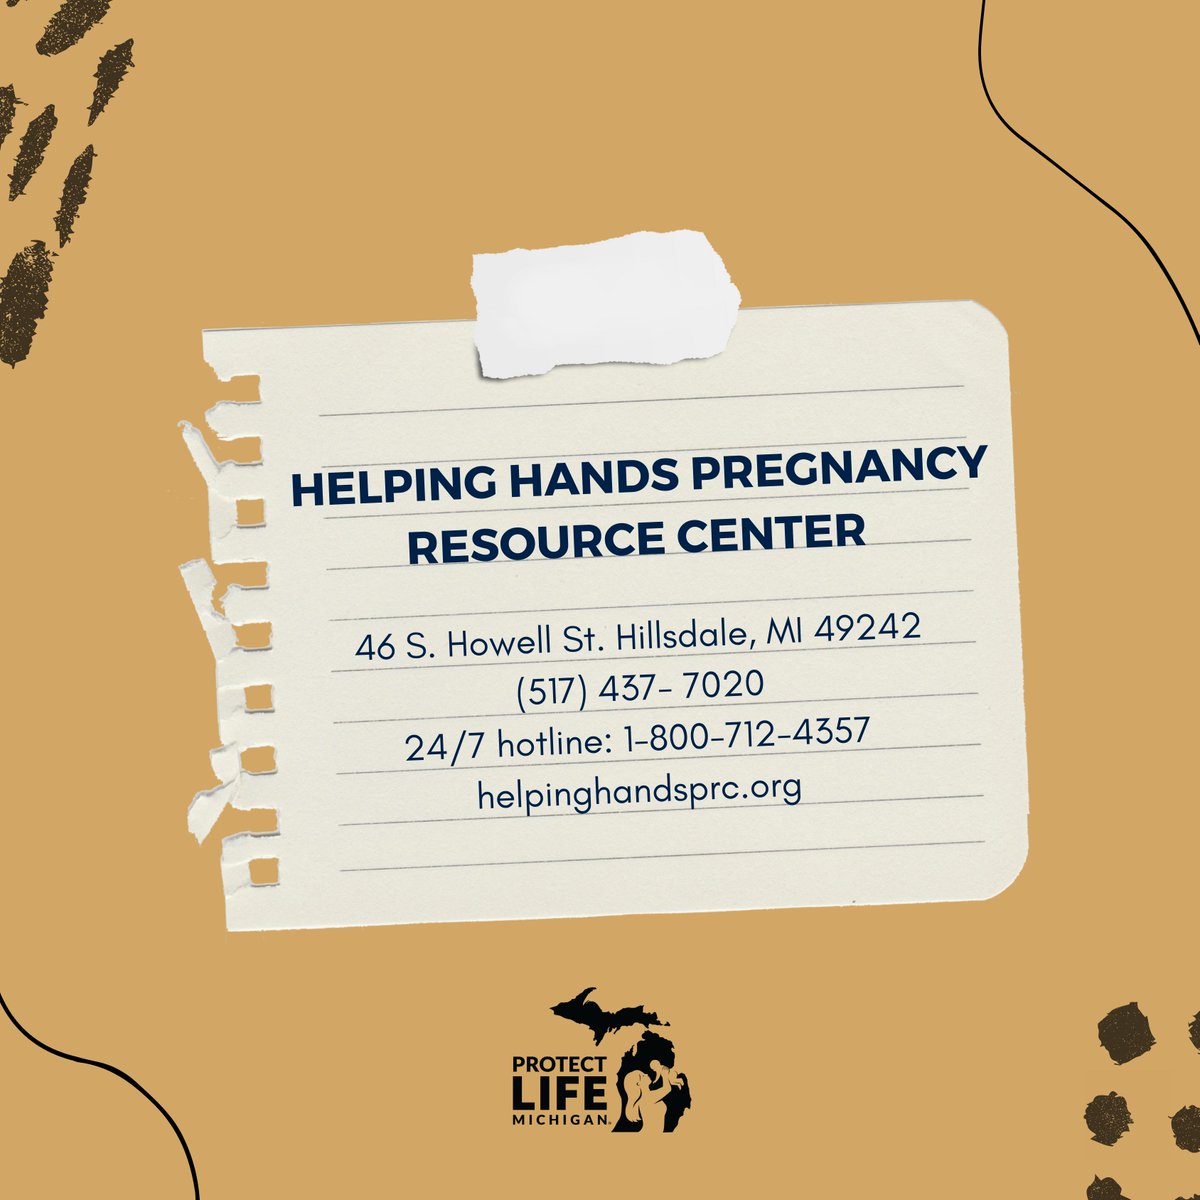 Do you live in the #Hillsdale area? We have resources for expecting mothers who need support — Helping Hands Pregnancy Resource Center.

Their goal is to offer hope, help, and healing to mothers with unplanned pregnancies! 💙 #michiganfamilies #unplannedpregnancy